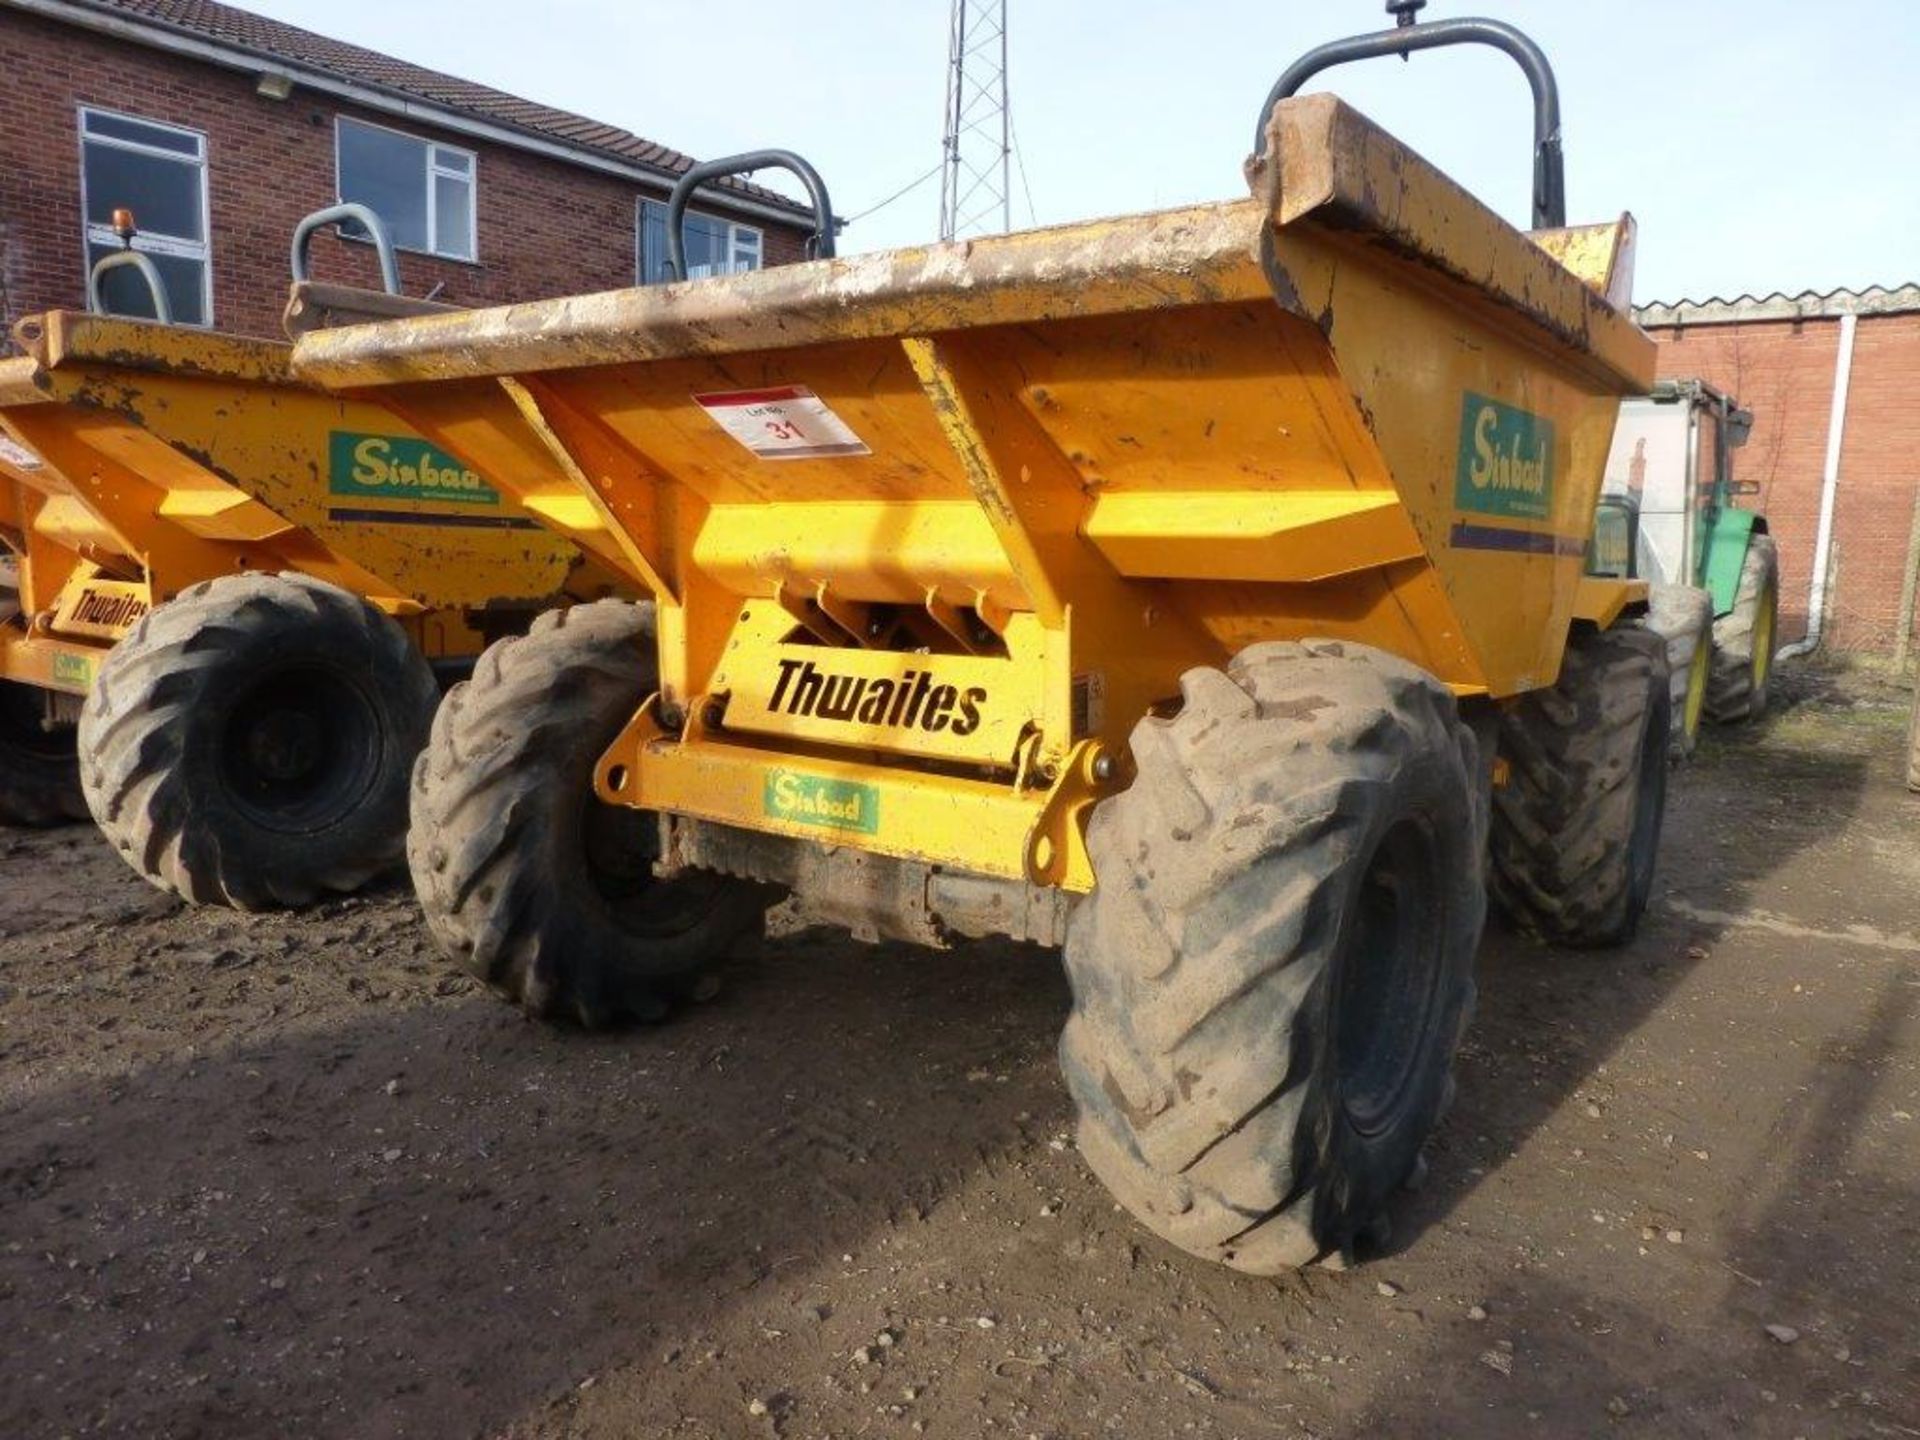 Thwaites 6-tonne 4x4 articulated dumper (2007), indicated hours 1484.2, weight 4160Kg, VIN no.